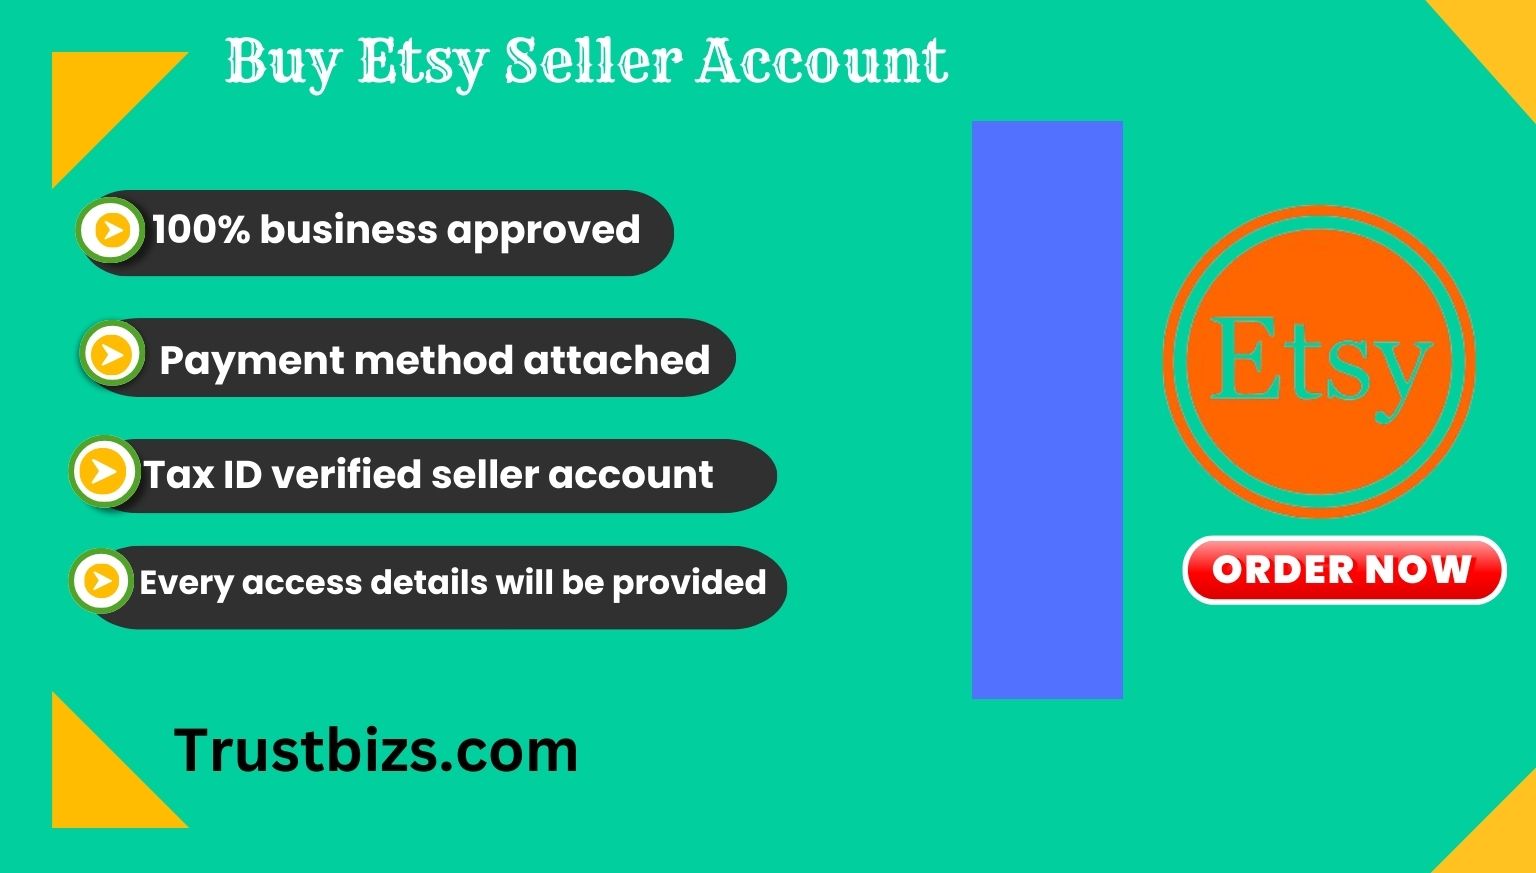 Buy Etsy Seller Account we provide 100 genuine accounts verified with email, selfie, LLC, Passport, EIN, Tax documents bank account
